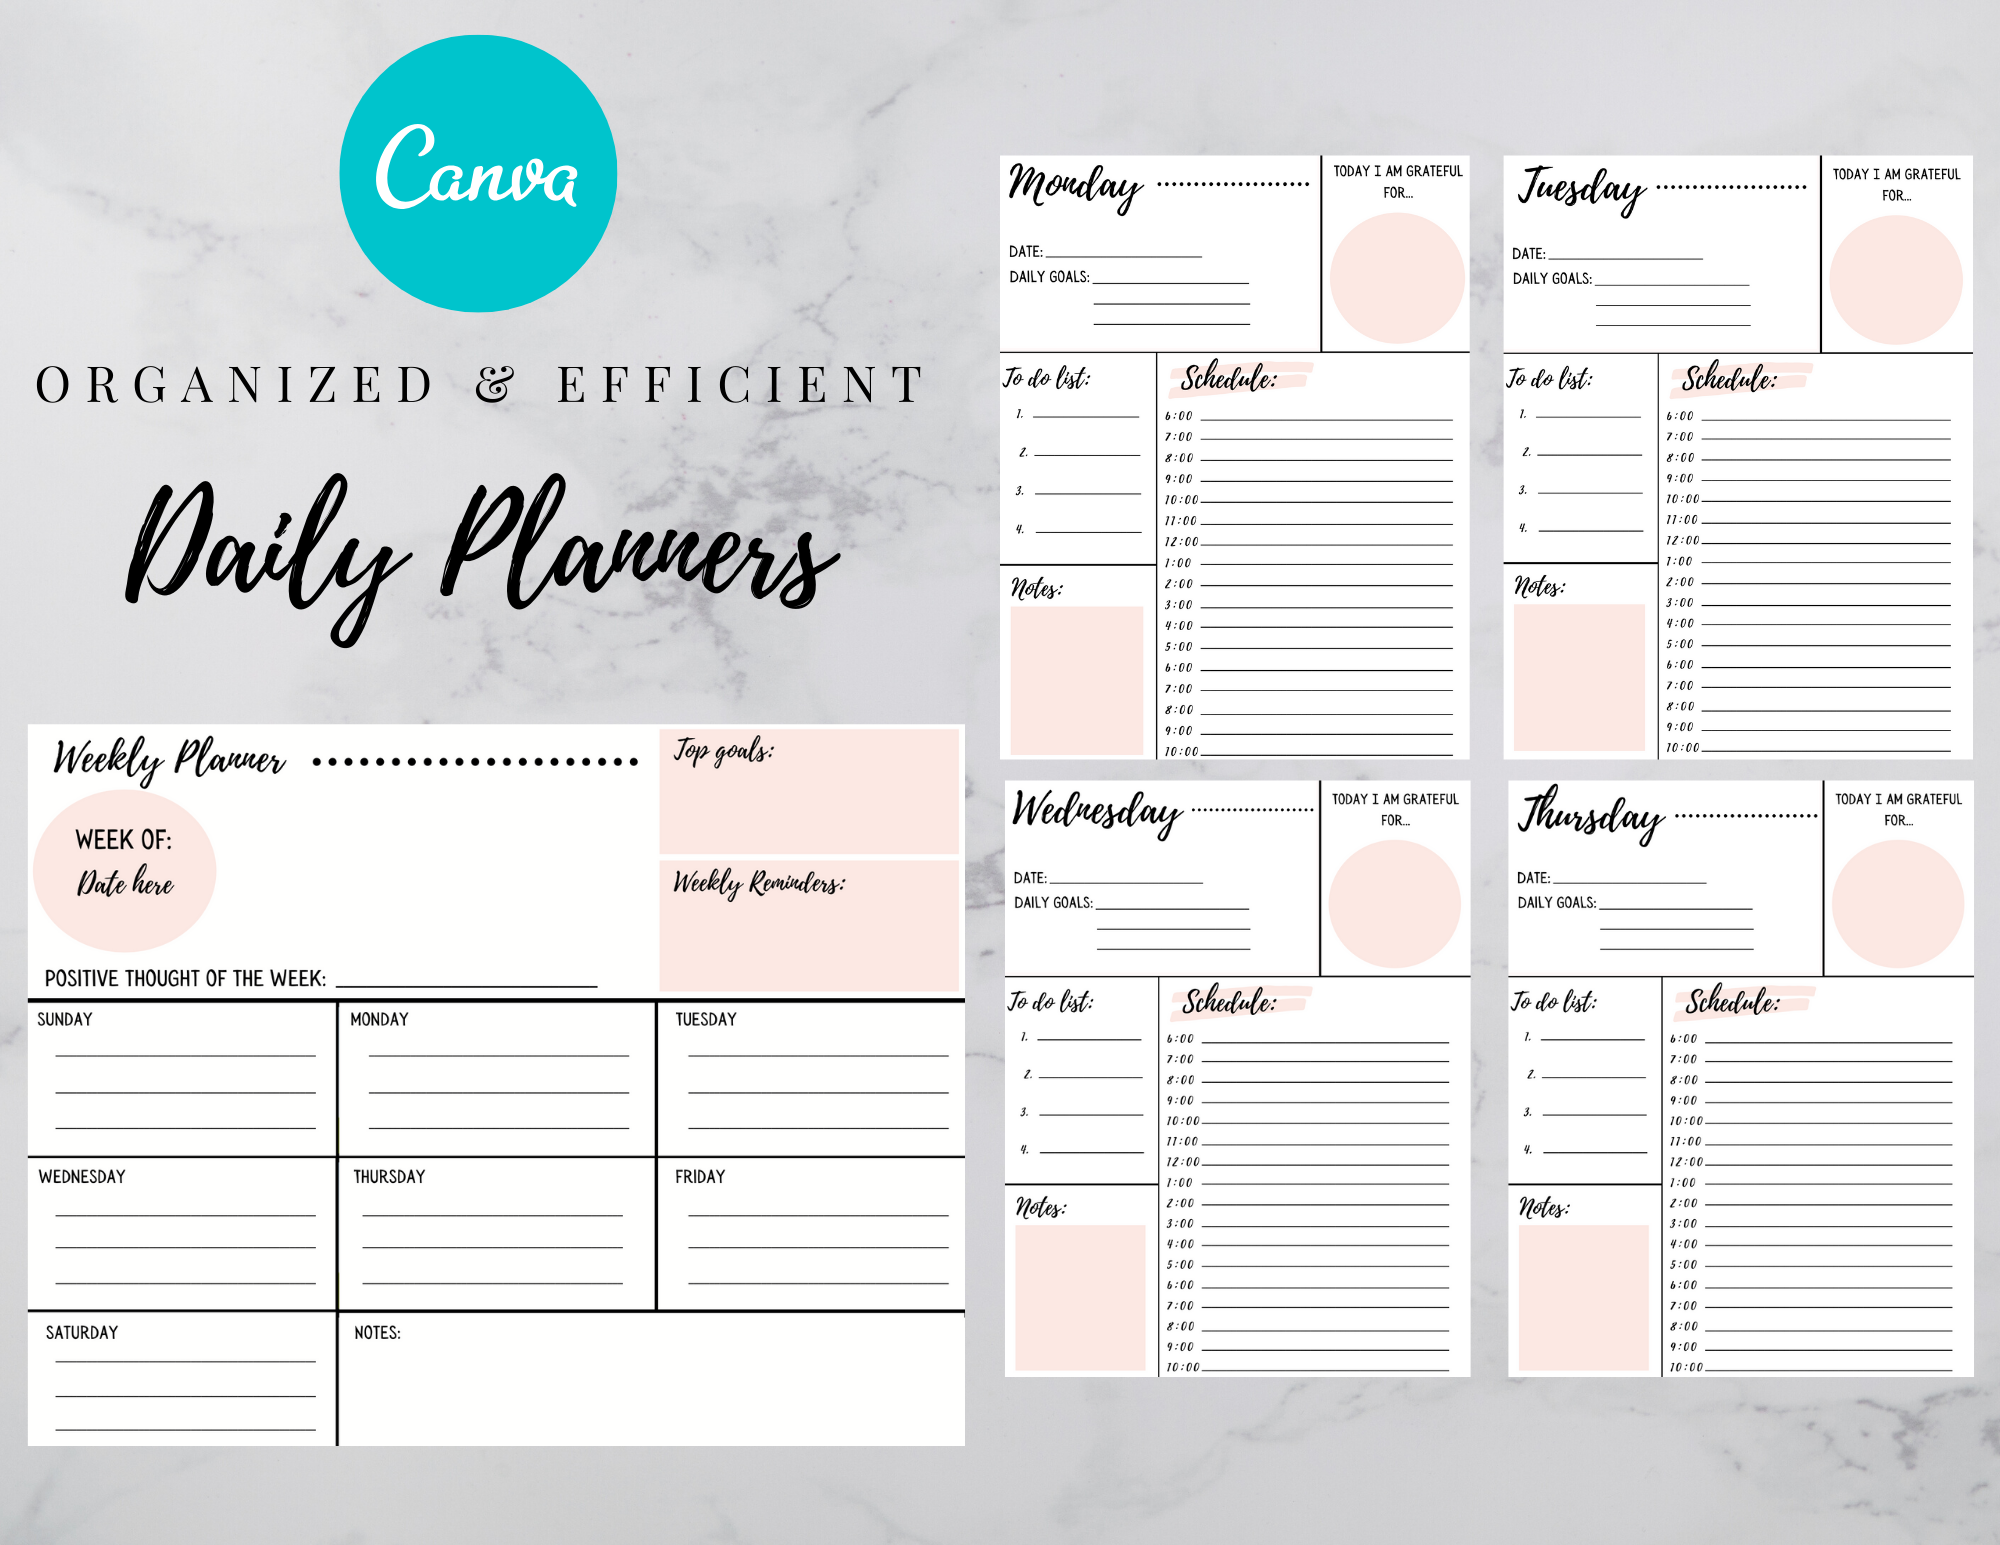 a snapshot of images included in the Daily Planner template package